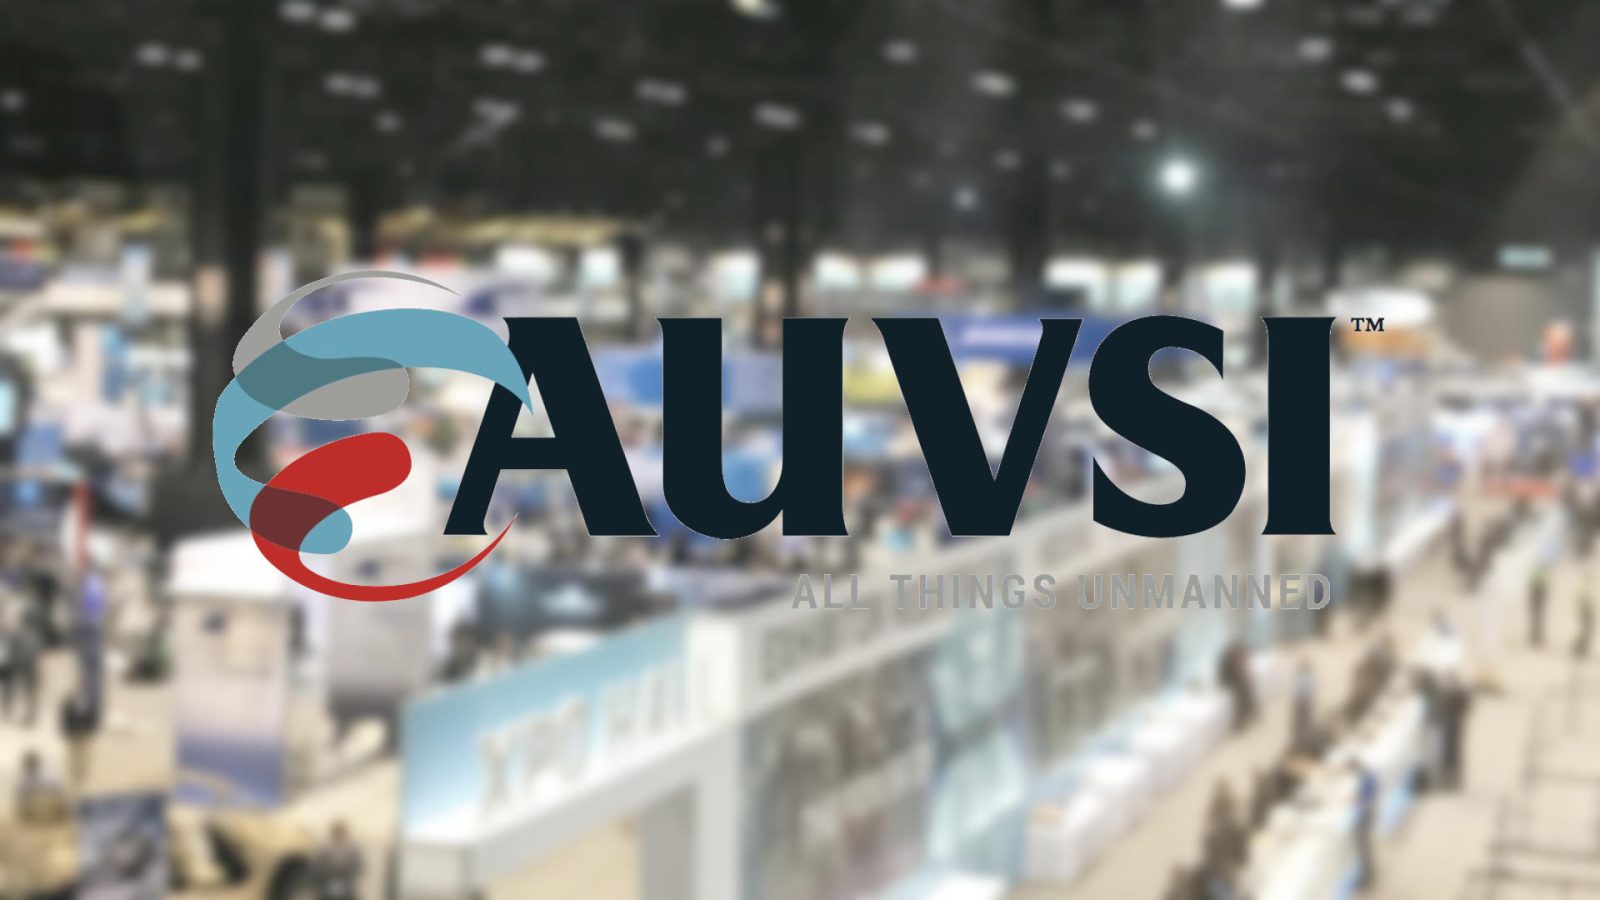 Call for entries opened for 2020 AUVSI XCELLENCE Awards